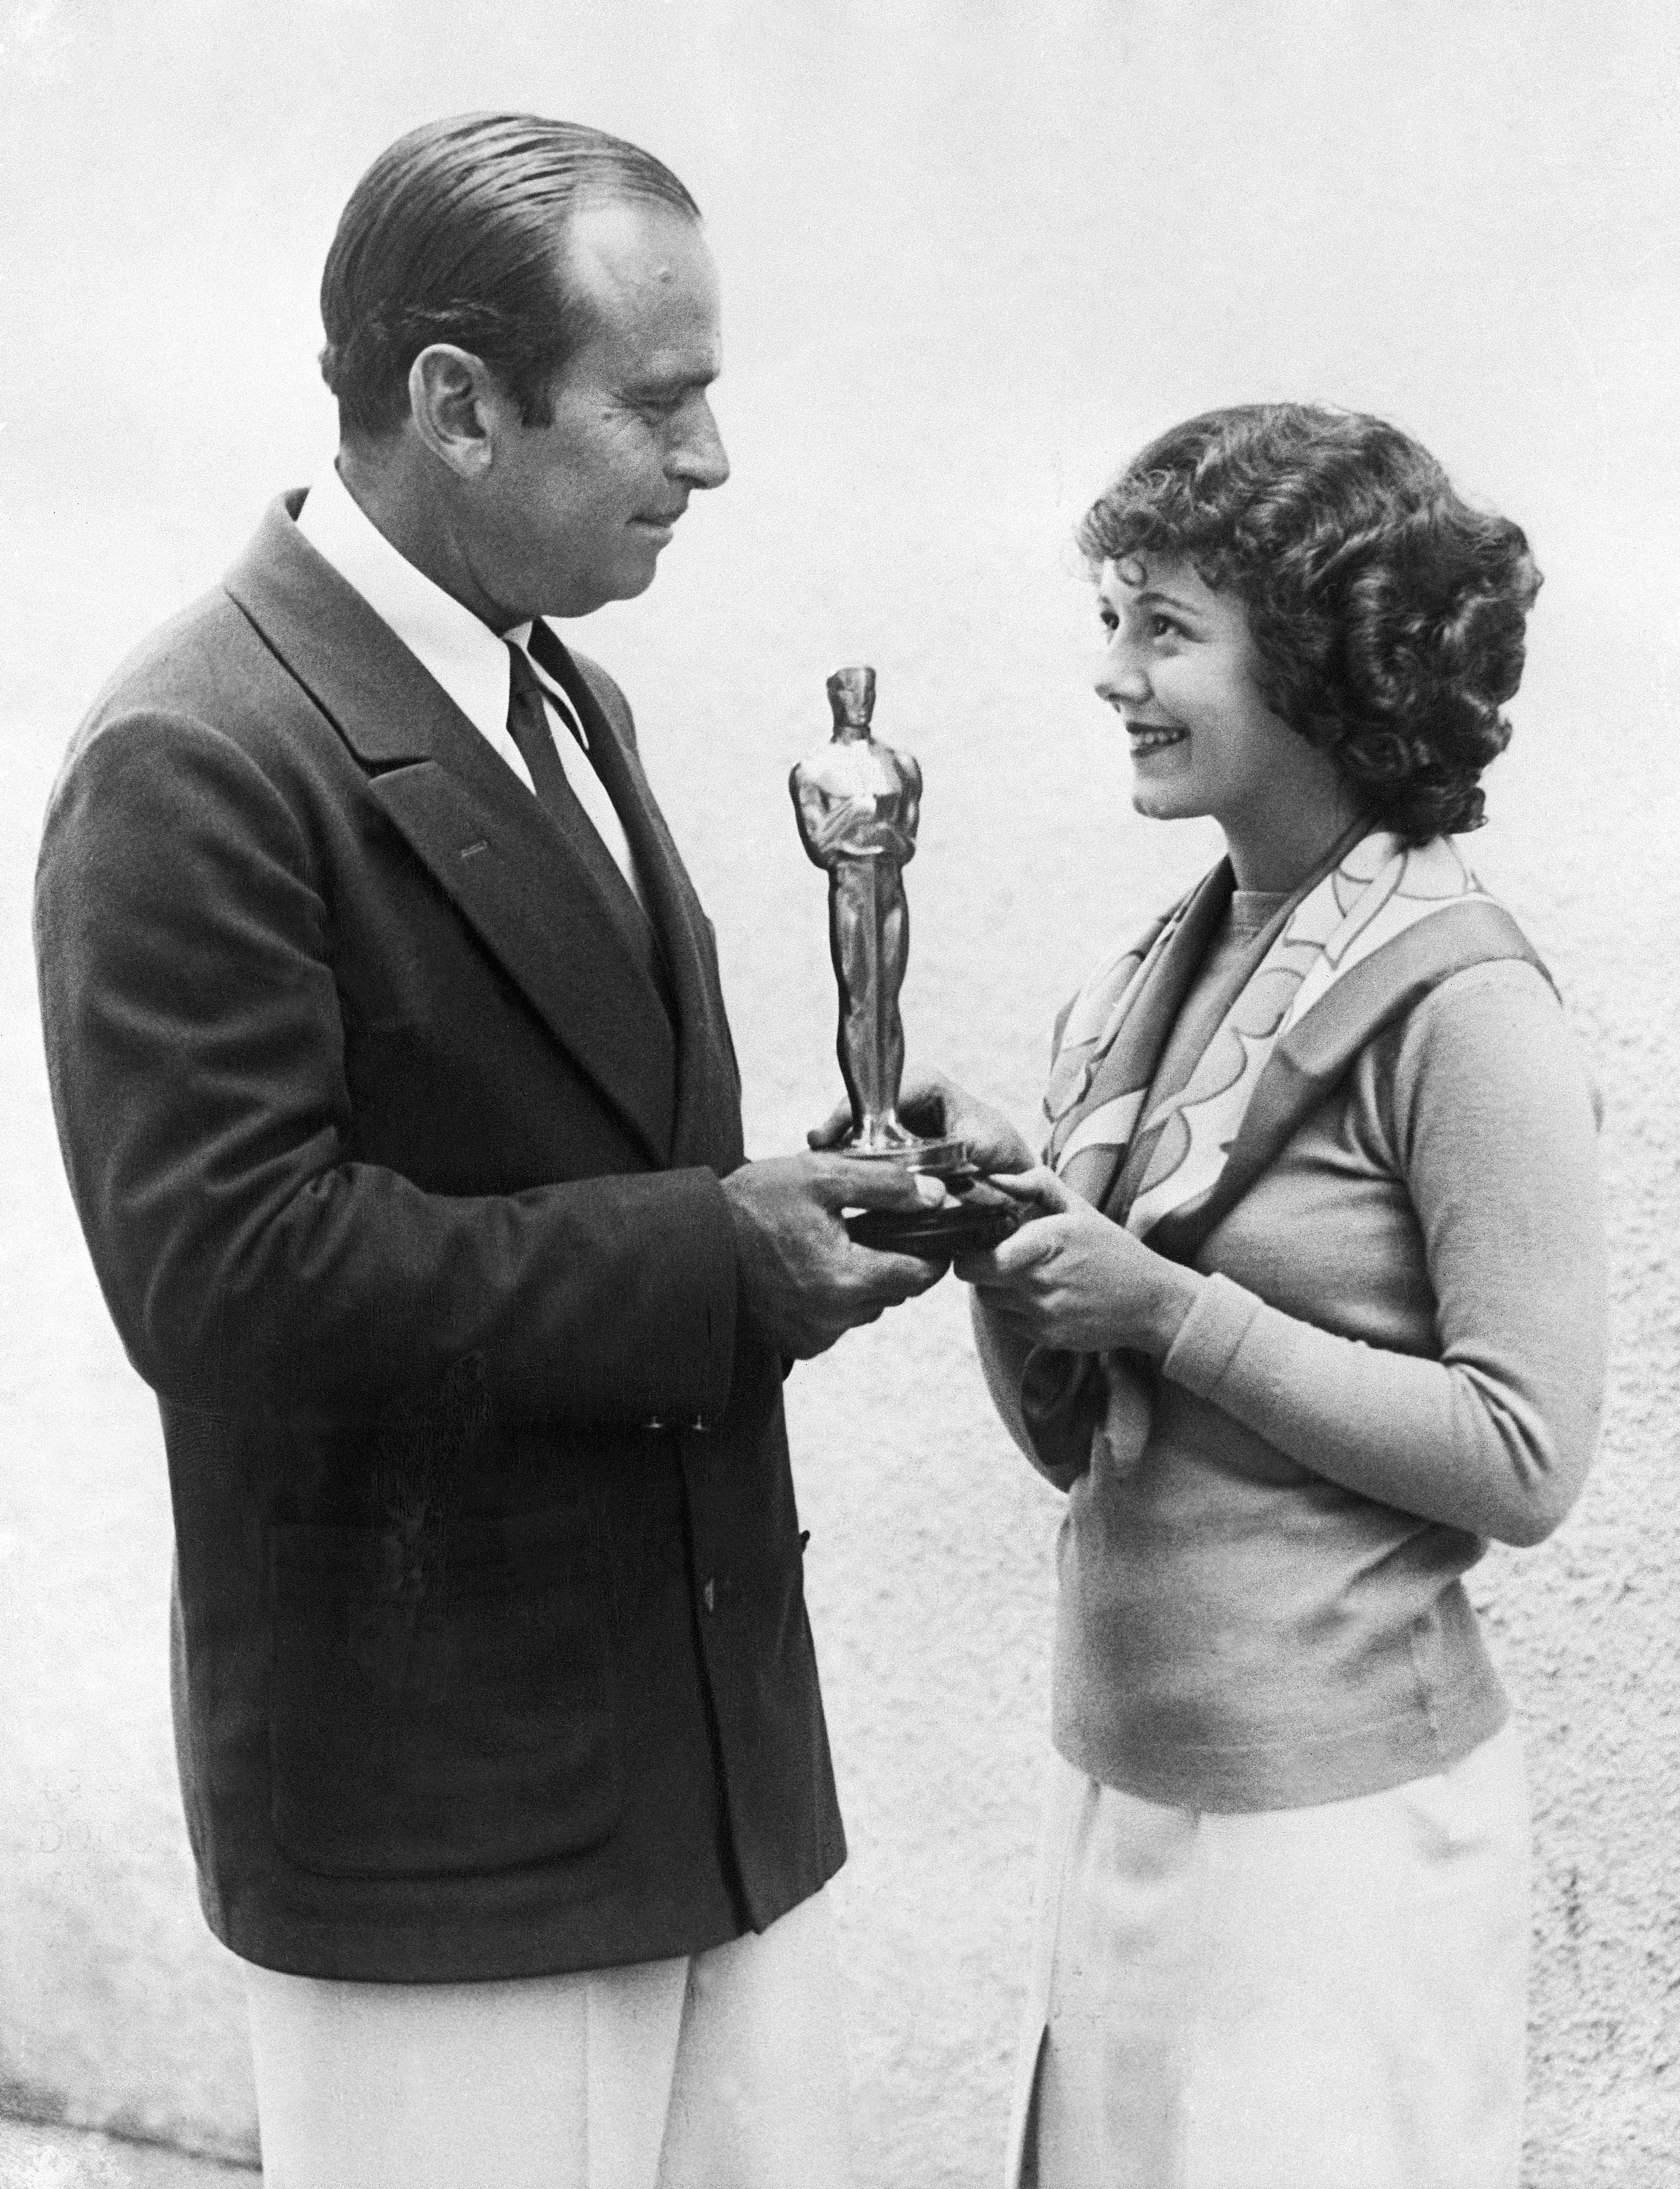 Douglas Fairbanks presents Janet Gaynor with the first Academy Award for Best Actress